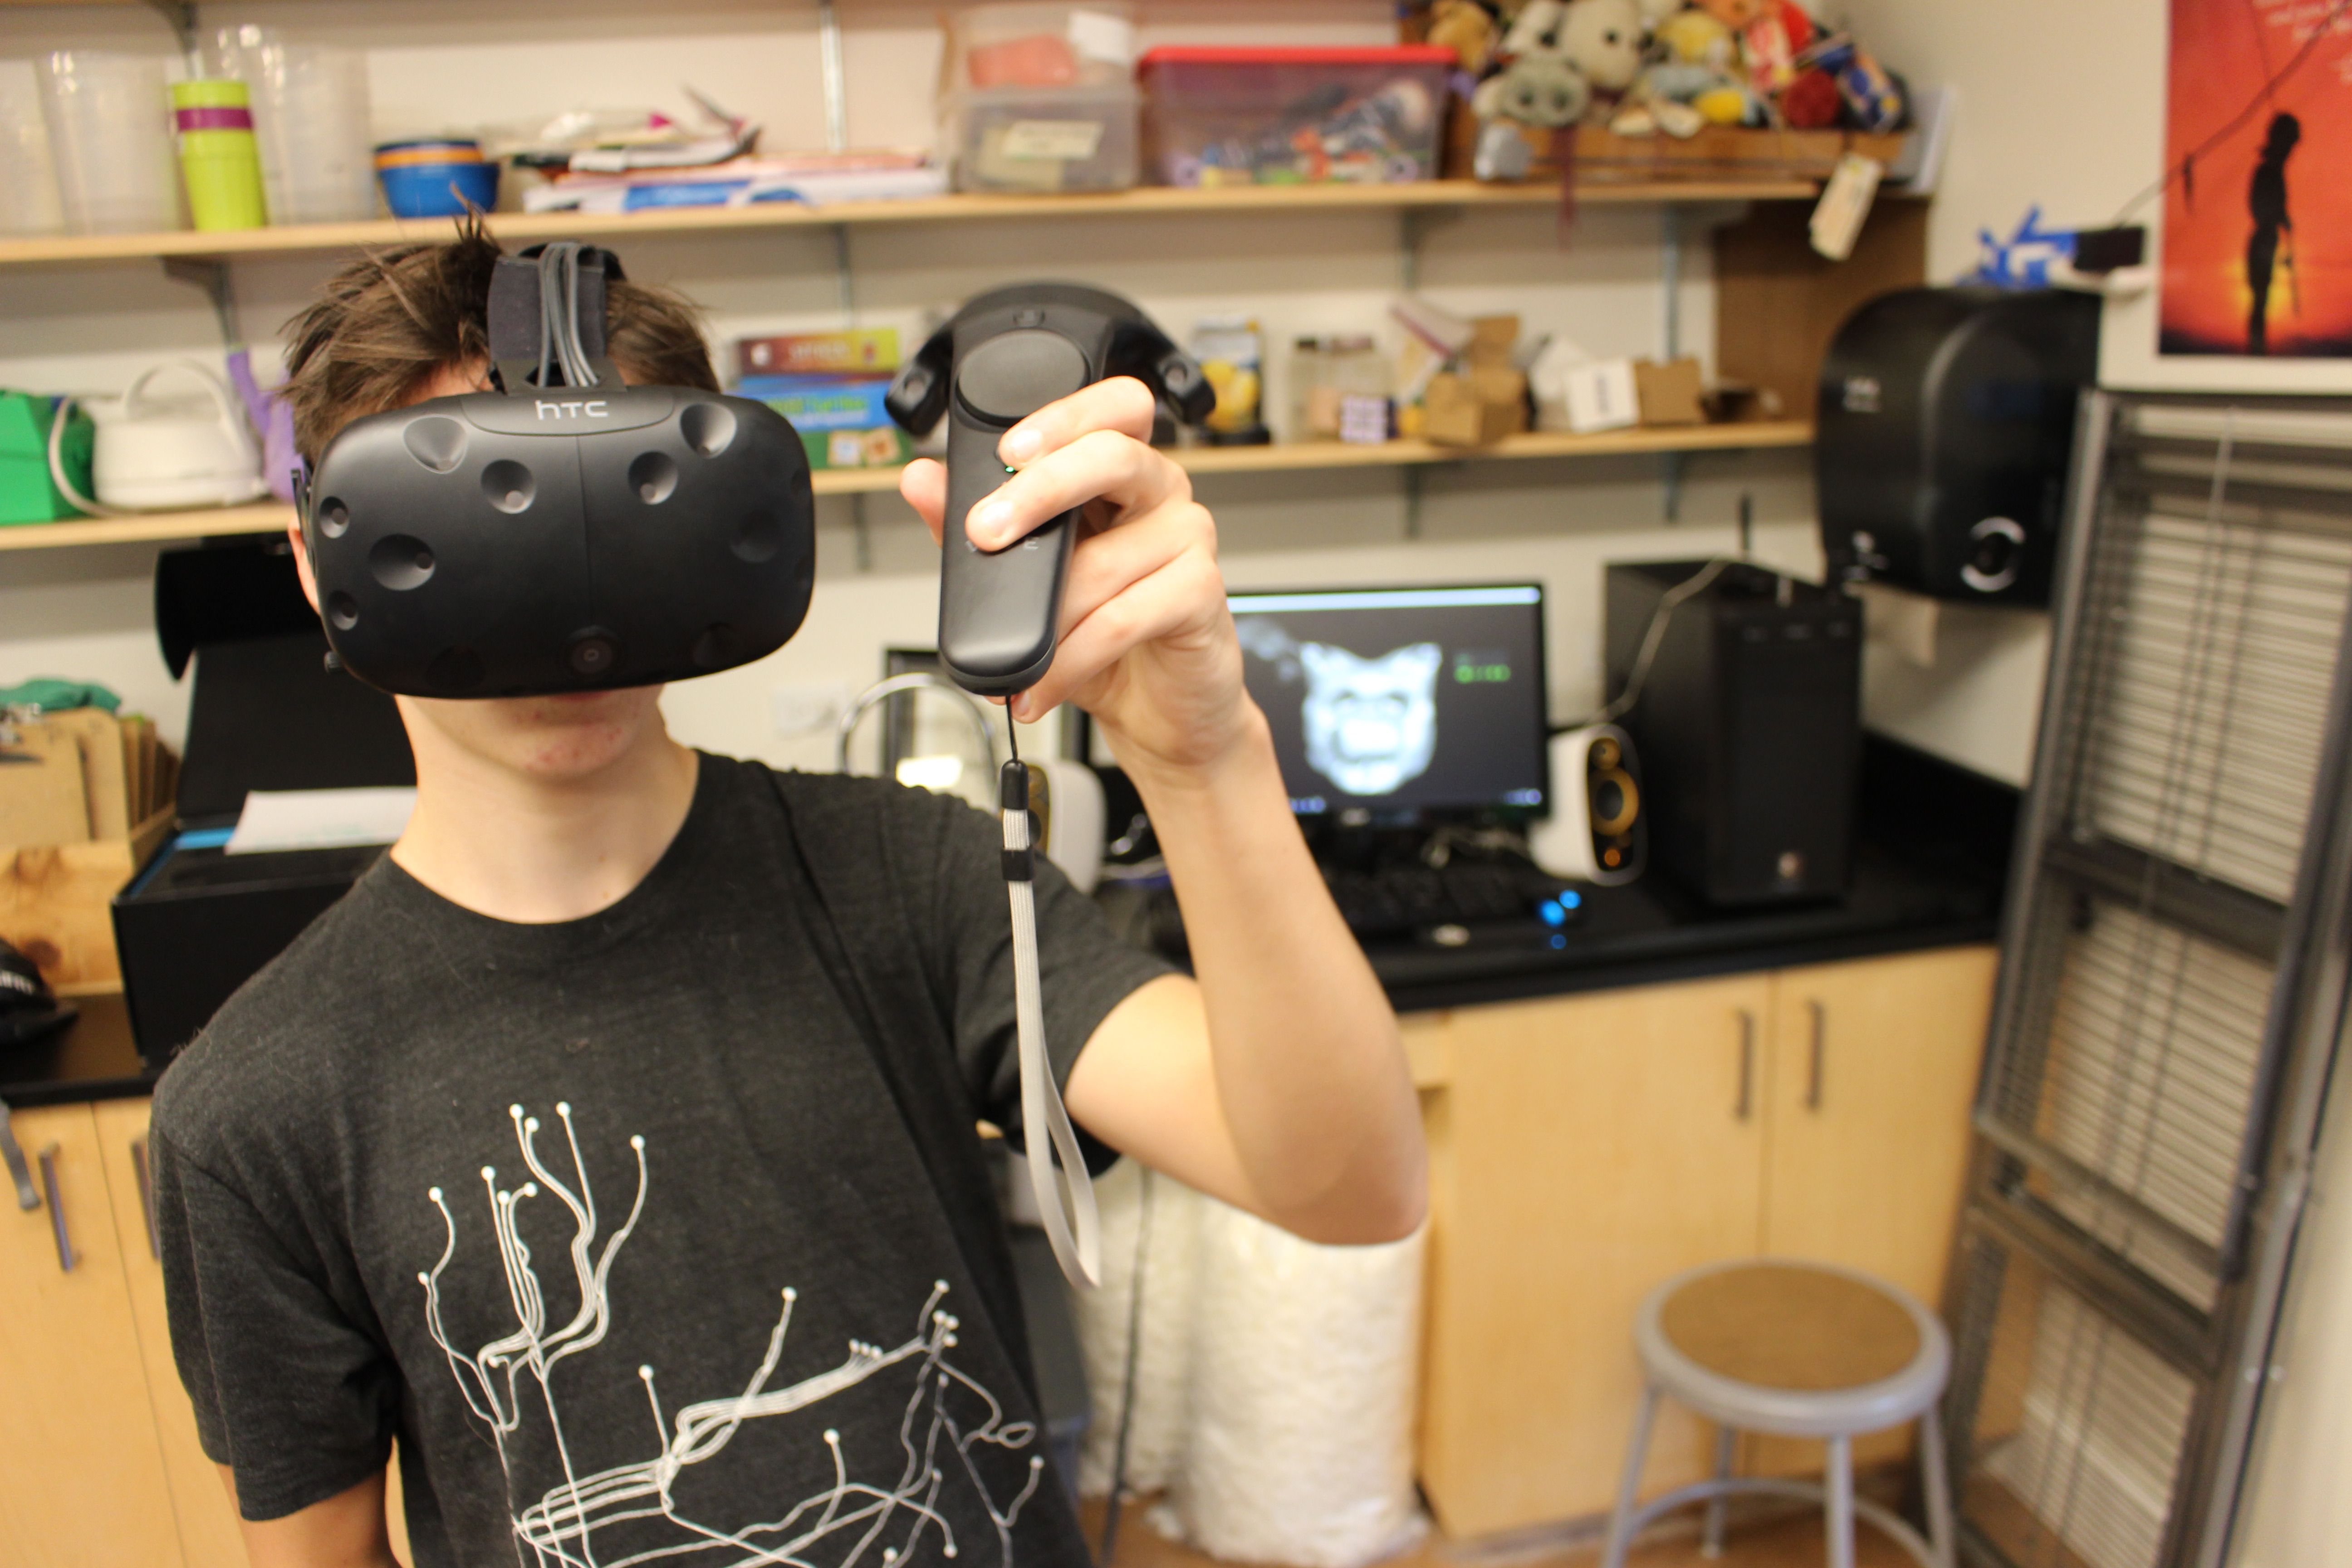 What Can Kids Make Using Virtual Reality?